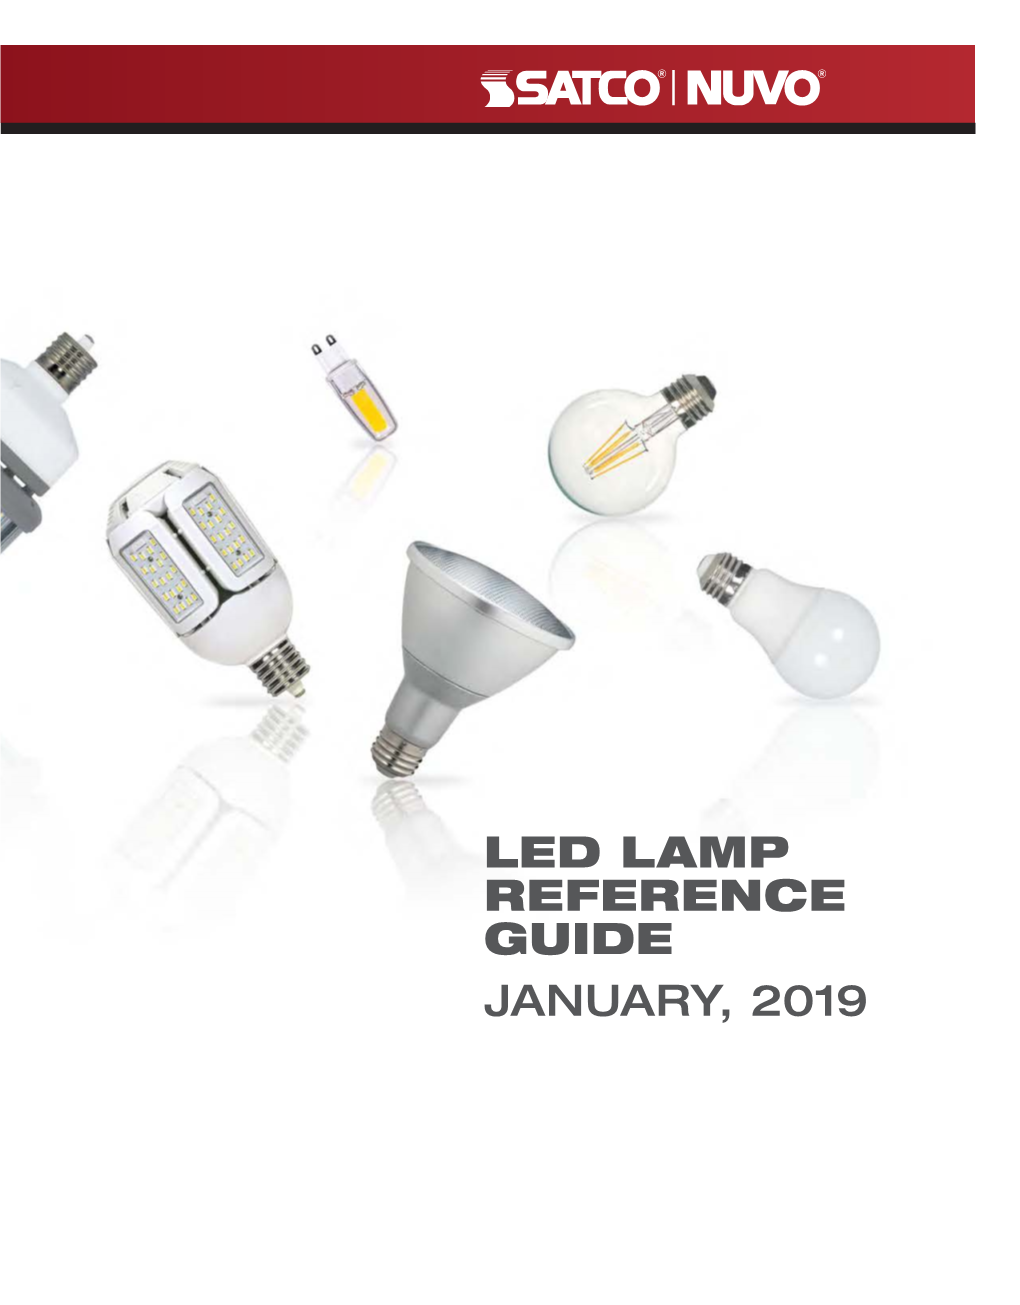 LED LAMP REFERENCE GUIDE JANUARY, 2019 We Are Pleased to Present the Latest Edition of Our LED Lamp Reference Guide